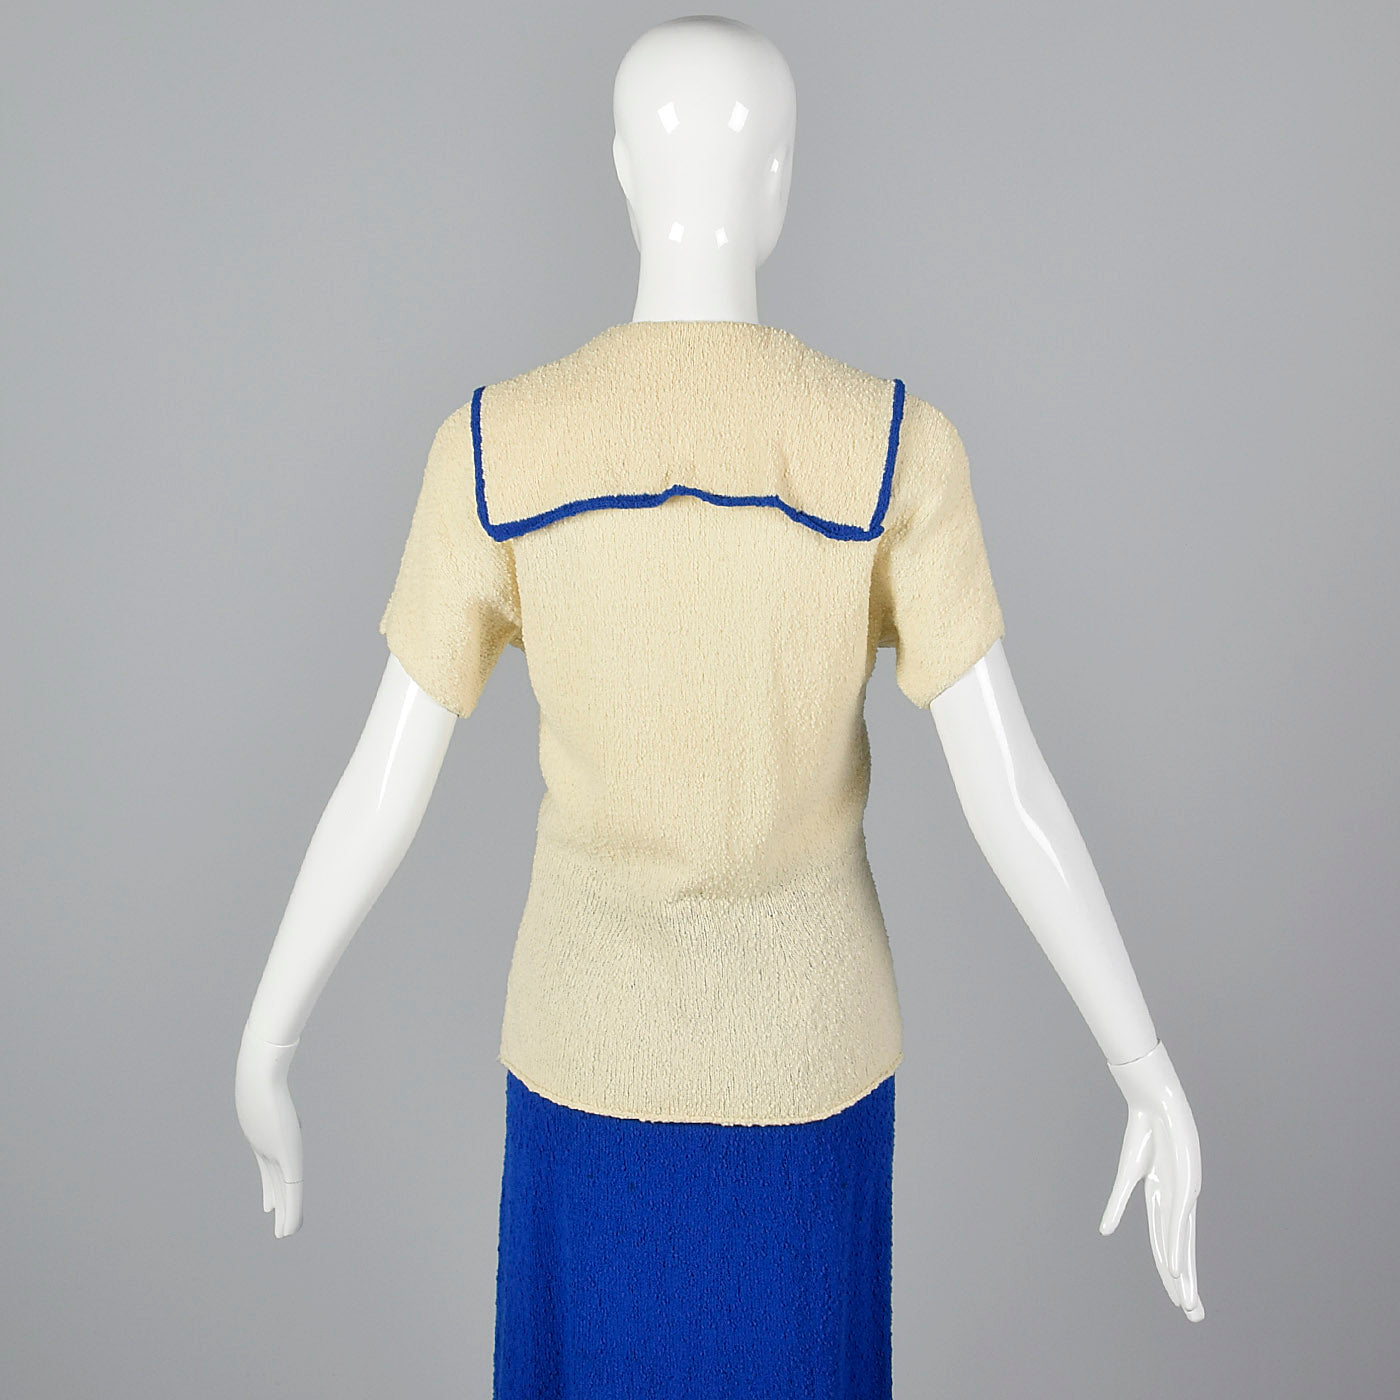 1940s Nautical-Style Two Piece Knit Outfit